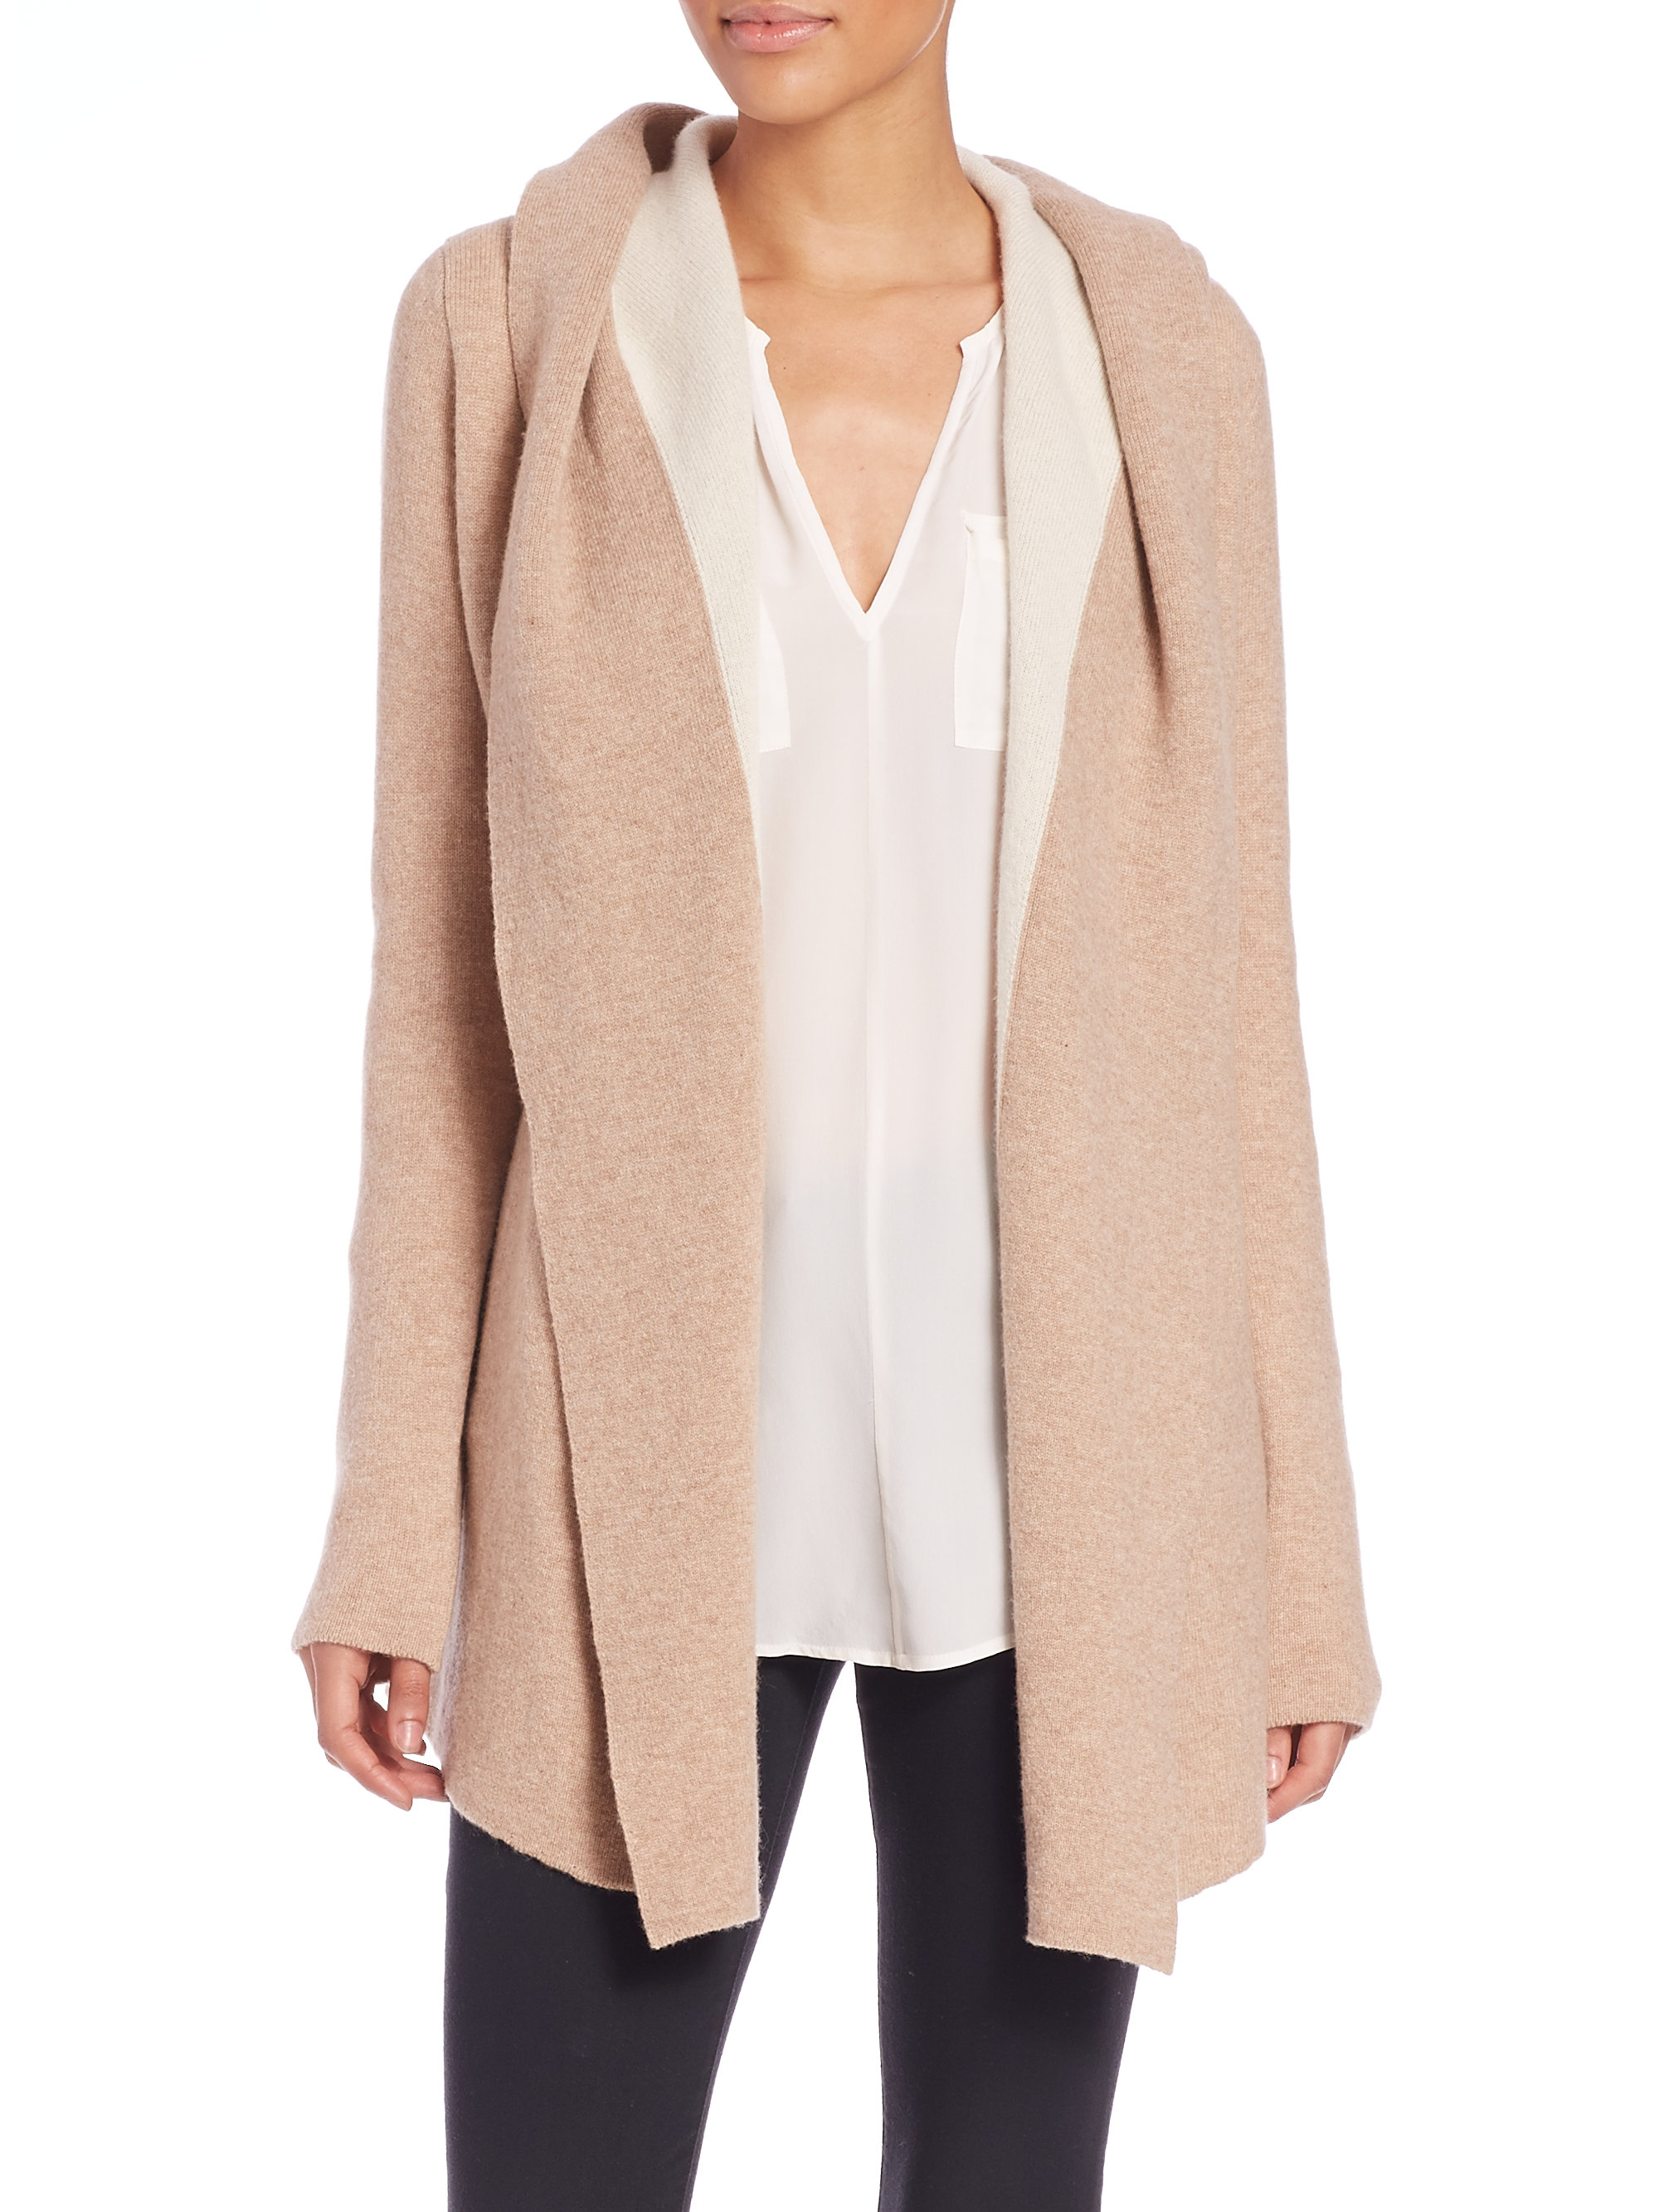 Joie Gredan Hooded Wool & Cashmere Cardigan in Natural | Lyst